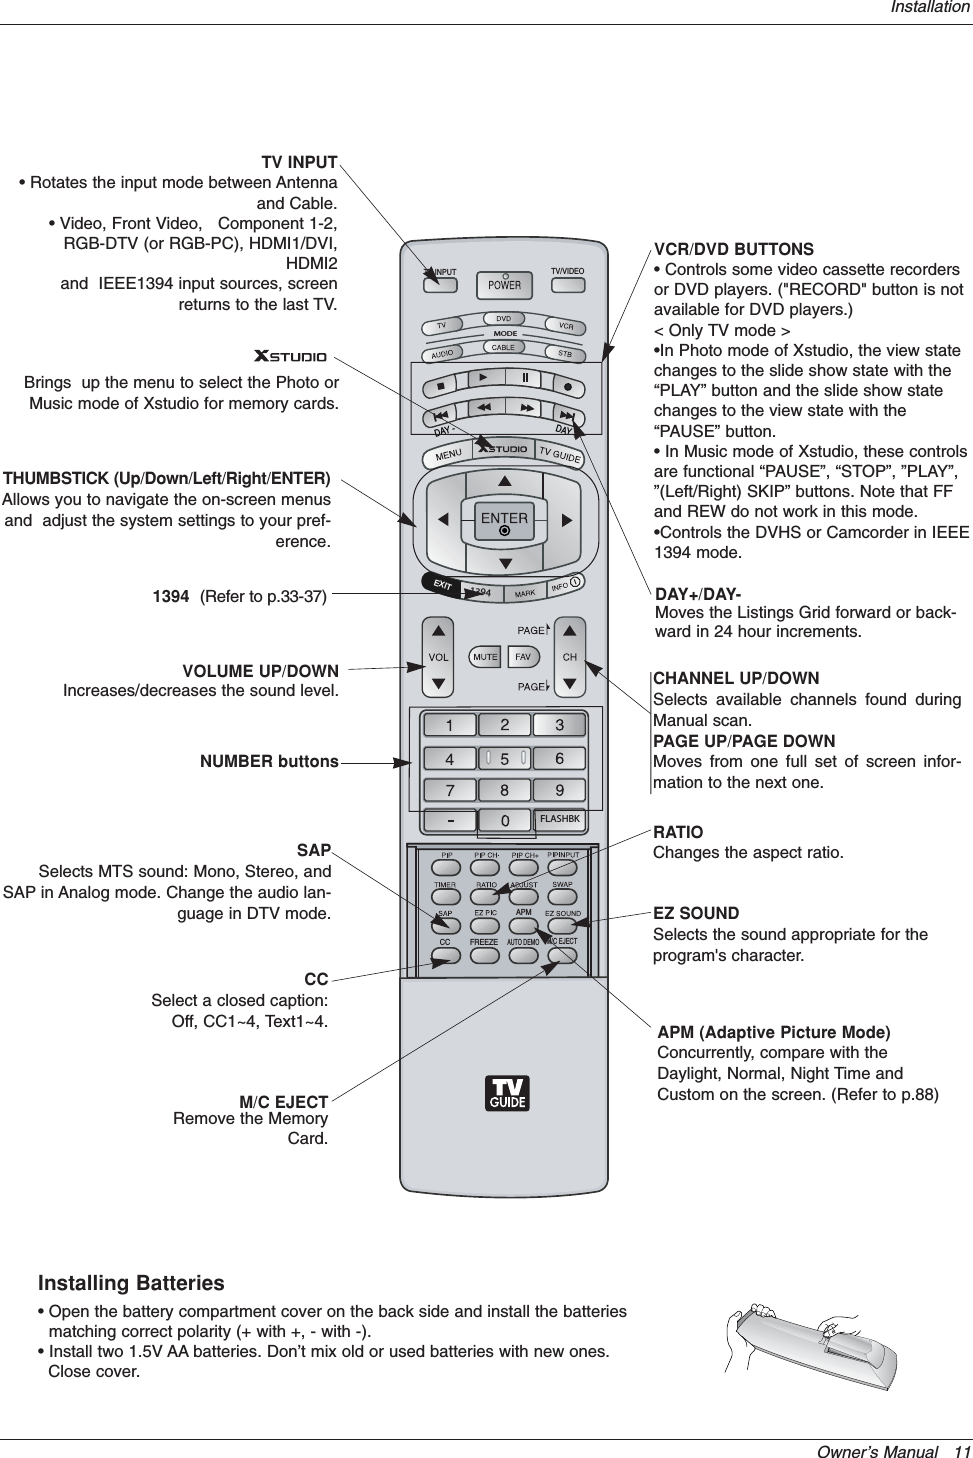 Owner’s Manual   11InstallationDAY+/DAY-Moves the Listings Grid forward or back-ward in 24 hour increments.MODEDAY -DAY +FLASHBKAPMCC1394FREEZETV INPUT TV/VIDEOM/C EJECTAUTO DEMOEXITNUMBER buttonsVCR/DVD BUTTONS• Controls some video cassette recordersor DVD players. (&quot;RECORD&quot; button is notavailable for DVD players.)&lt; Only TV mode &gt;•In Photo mode of Xstudio, the view statechanges to the slide show state with the“PLAY” button and the slide show statechanges to the view state with the“PAUSE” button.• In Music mode of Xstudio, these controlsare functional “PAUSE”, “STOP”, ”PLAY”,”(Left/Right) SKIP” buttons. Note that FFand REW do not work in this mode.•Controls the DVHS or Camcorder in IEEE1394 mode. RATIOChanges the aspect ratio.CCSelect a closed caption:Off, CC1~4, Text1~4.THUMBSTICK (Up/Down/Left/Right/ENTER)Allows you to navigate the on-screen menusand  adjust the system settings to your pref-erence.CHANNEL UP/DOWNSelects available channels found duringManual scan.PAGE UP/PAGE DOWNMoves from one full set of screen infor-mation to the next one.SAPSelects MTS sound: Mono, Stereo, andSAP in Analog mode. Change the audio lan-guage in DTV mode. EZ SOUNDSelects the sound appropriate for theprogram&apos;s character.APM (Adaptive Picture Mode)Concurrently, compare with theDaylight, Normal, Night Time andCustom on the screen. (Refer to p.88)VOLUME UP/DOWNIncreases/decreases the sound level.1394 (Refer to p.33-37)Brings  up the menu to select the Photo orMusic mode of Xstudio for memory cards.M/C EJECTRemove the MemoryCard.Installing Batteries• Open the battery compartment cover on the back side and install the batteriesmatching correct polarity (+ with +, - with -).• Install two 1.5V AA batteries. Don’t mix old or used batteries with new ones. Close cover.TV INPUT• Rotates the input mode between Antennaand Cable. • Video, Front Video,   Component 1-2,RGB-DTV (or RGB-PC), HDMI1/DVI,HDMI2and  IEEE1394 input sources, screenreturns to the last TV.